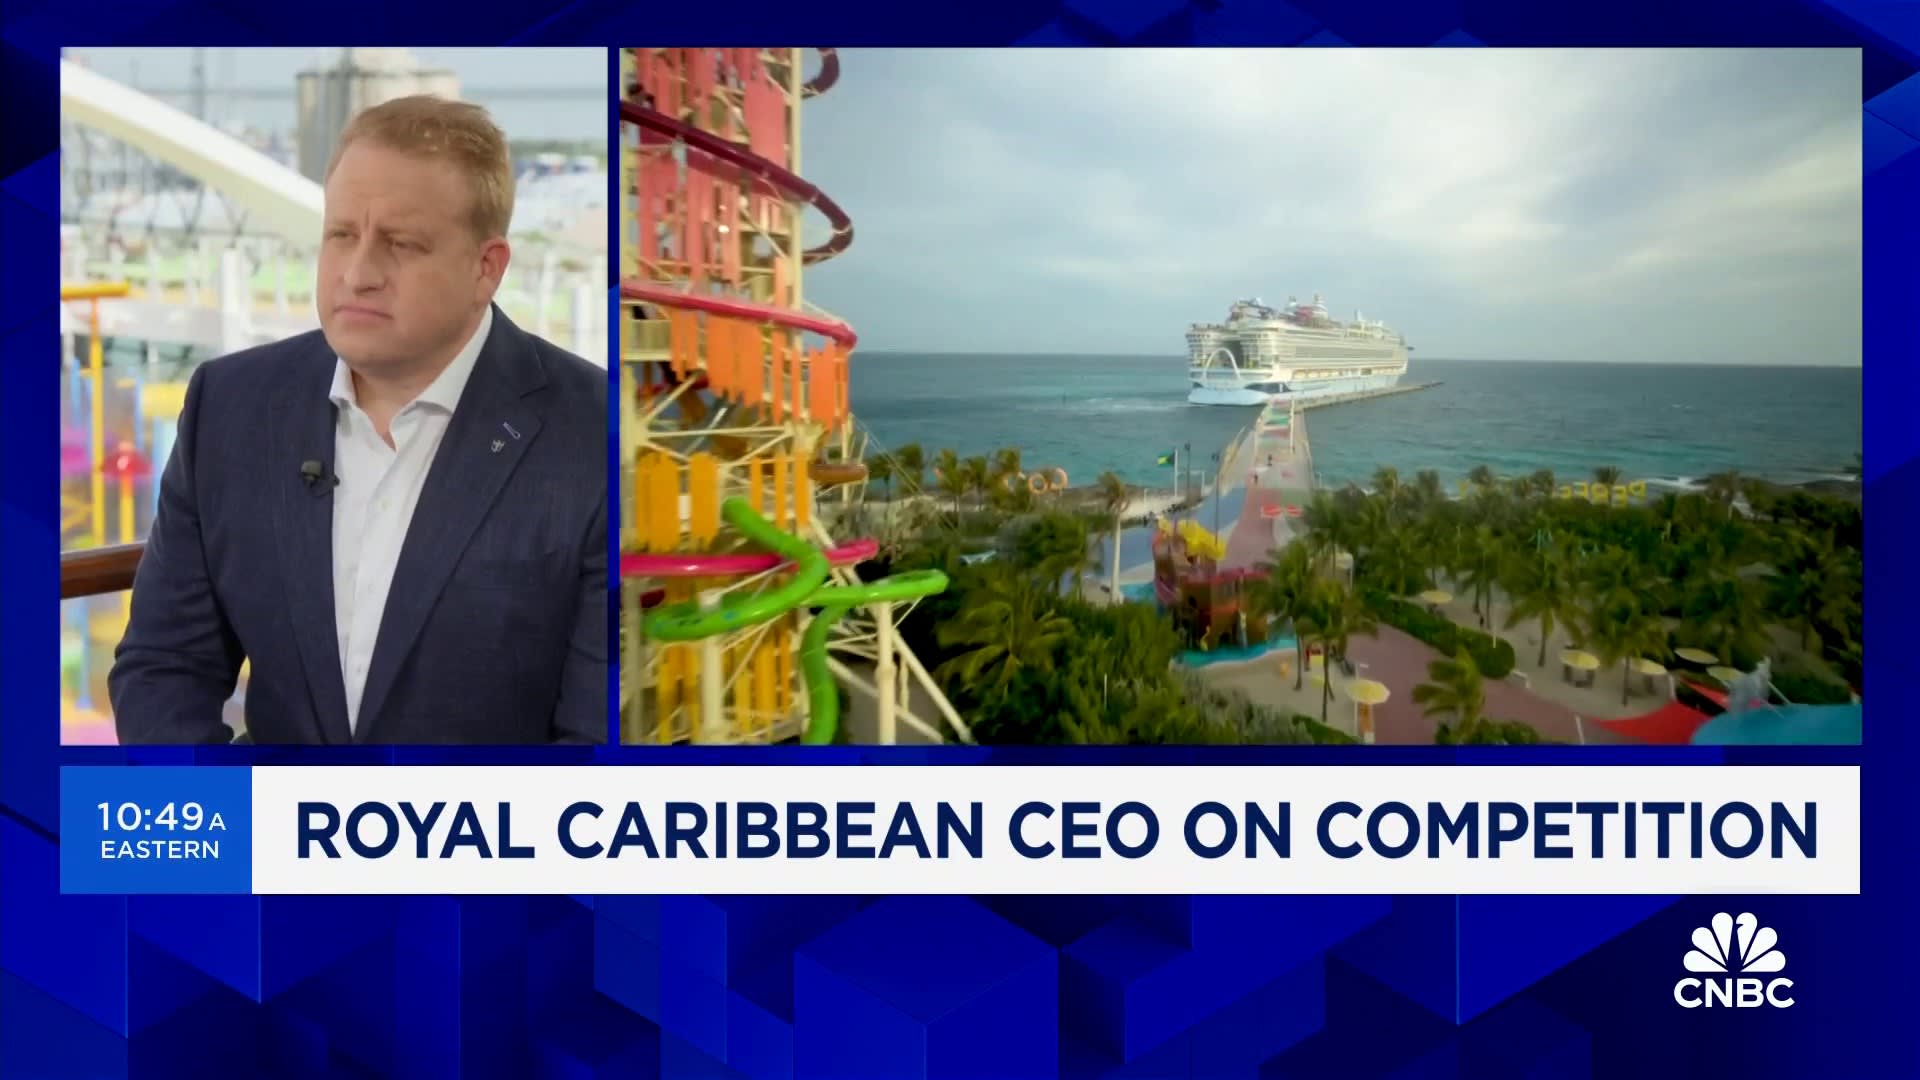 Consumer remains extremely resilient and is 'thirsting' for experiences, says Royal Caribbean CEO